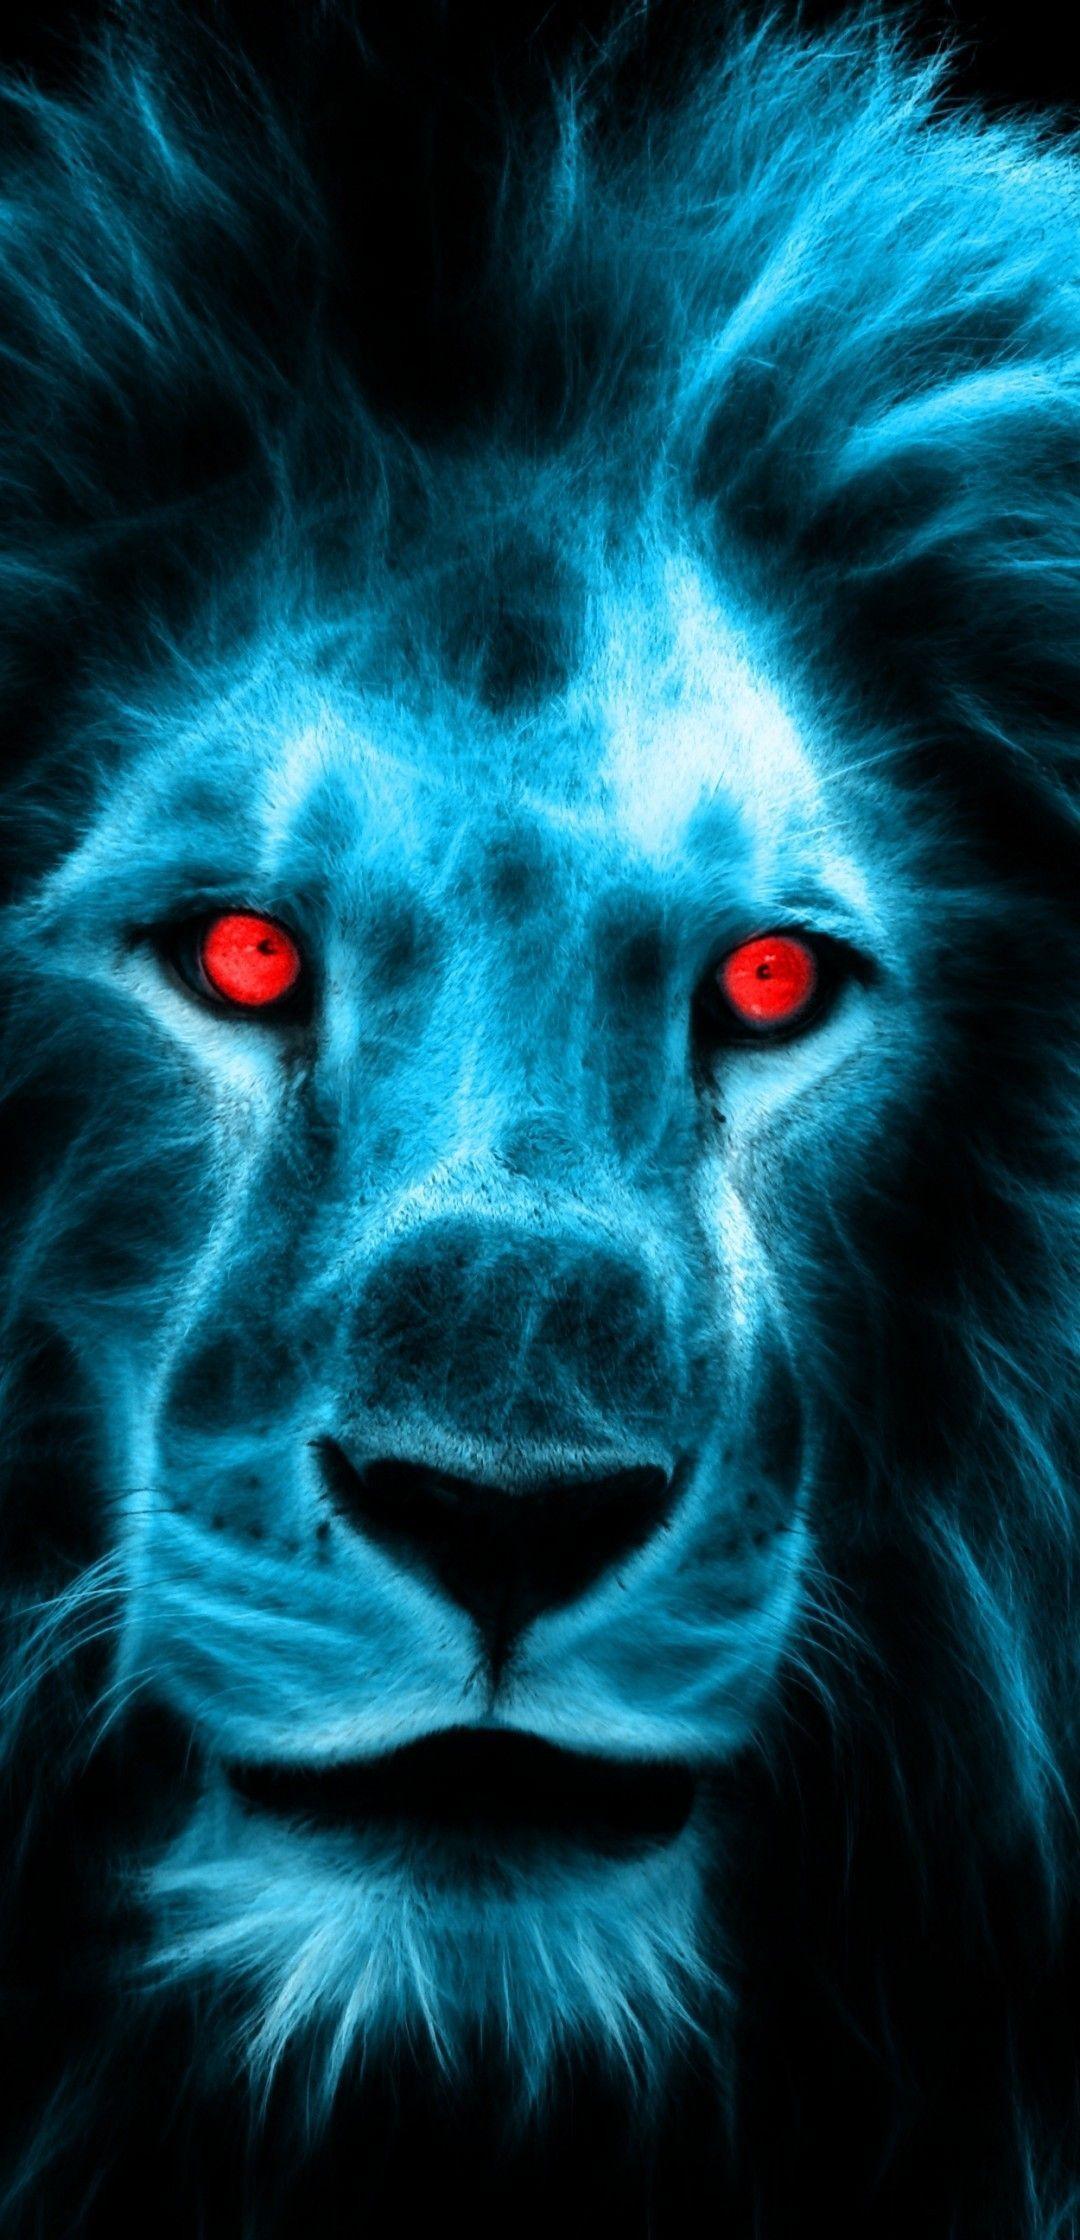 Fire Lion Stock Photos and Images - 123RF